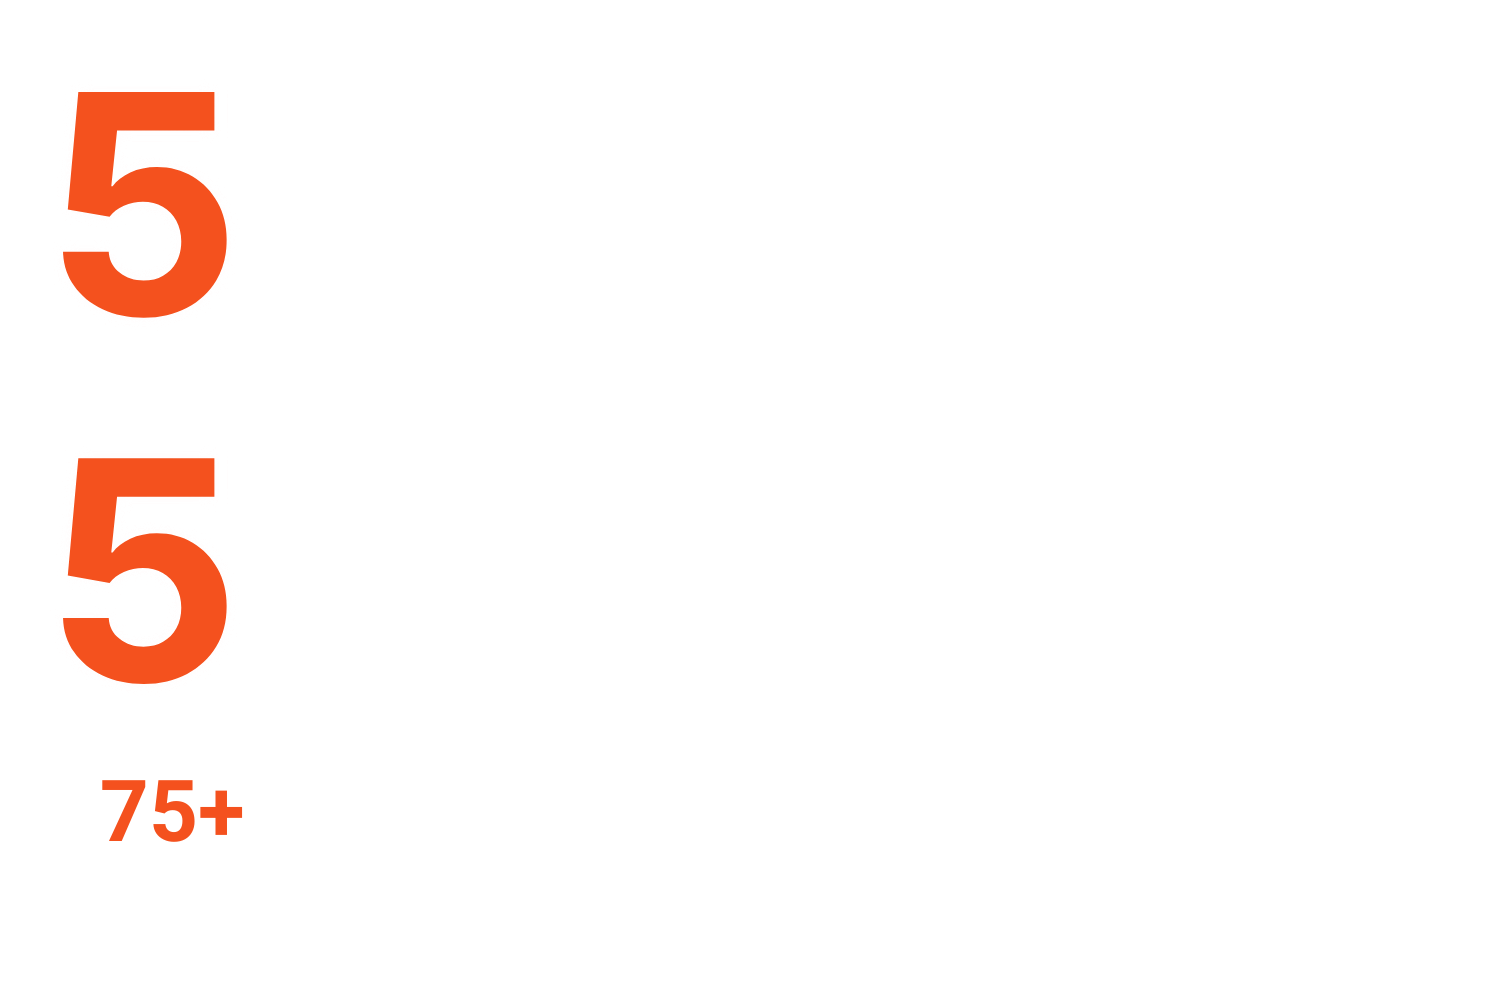 5 medics specific focus groups 5 network events 3 x job planning 2 x Junior Doctor WFM 75+ product sessions with medics teams